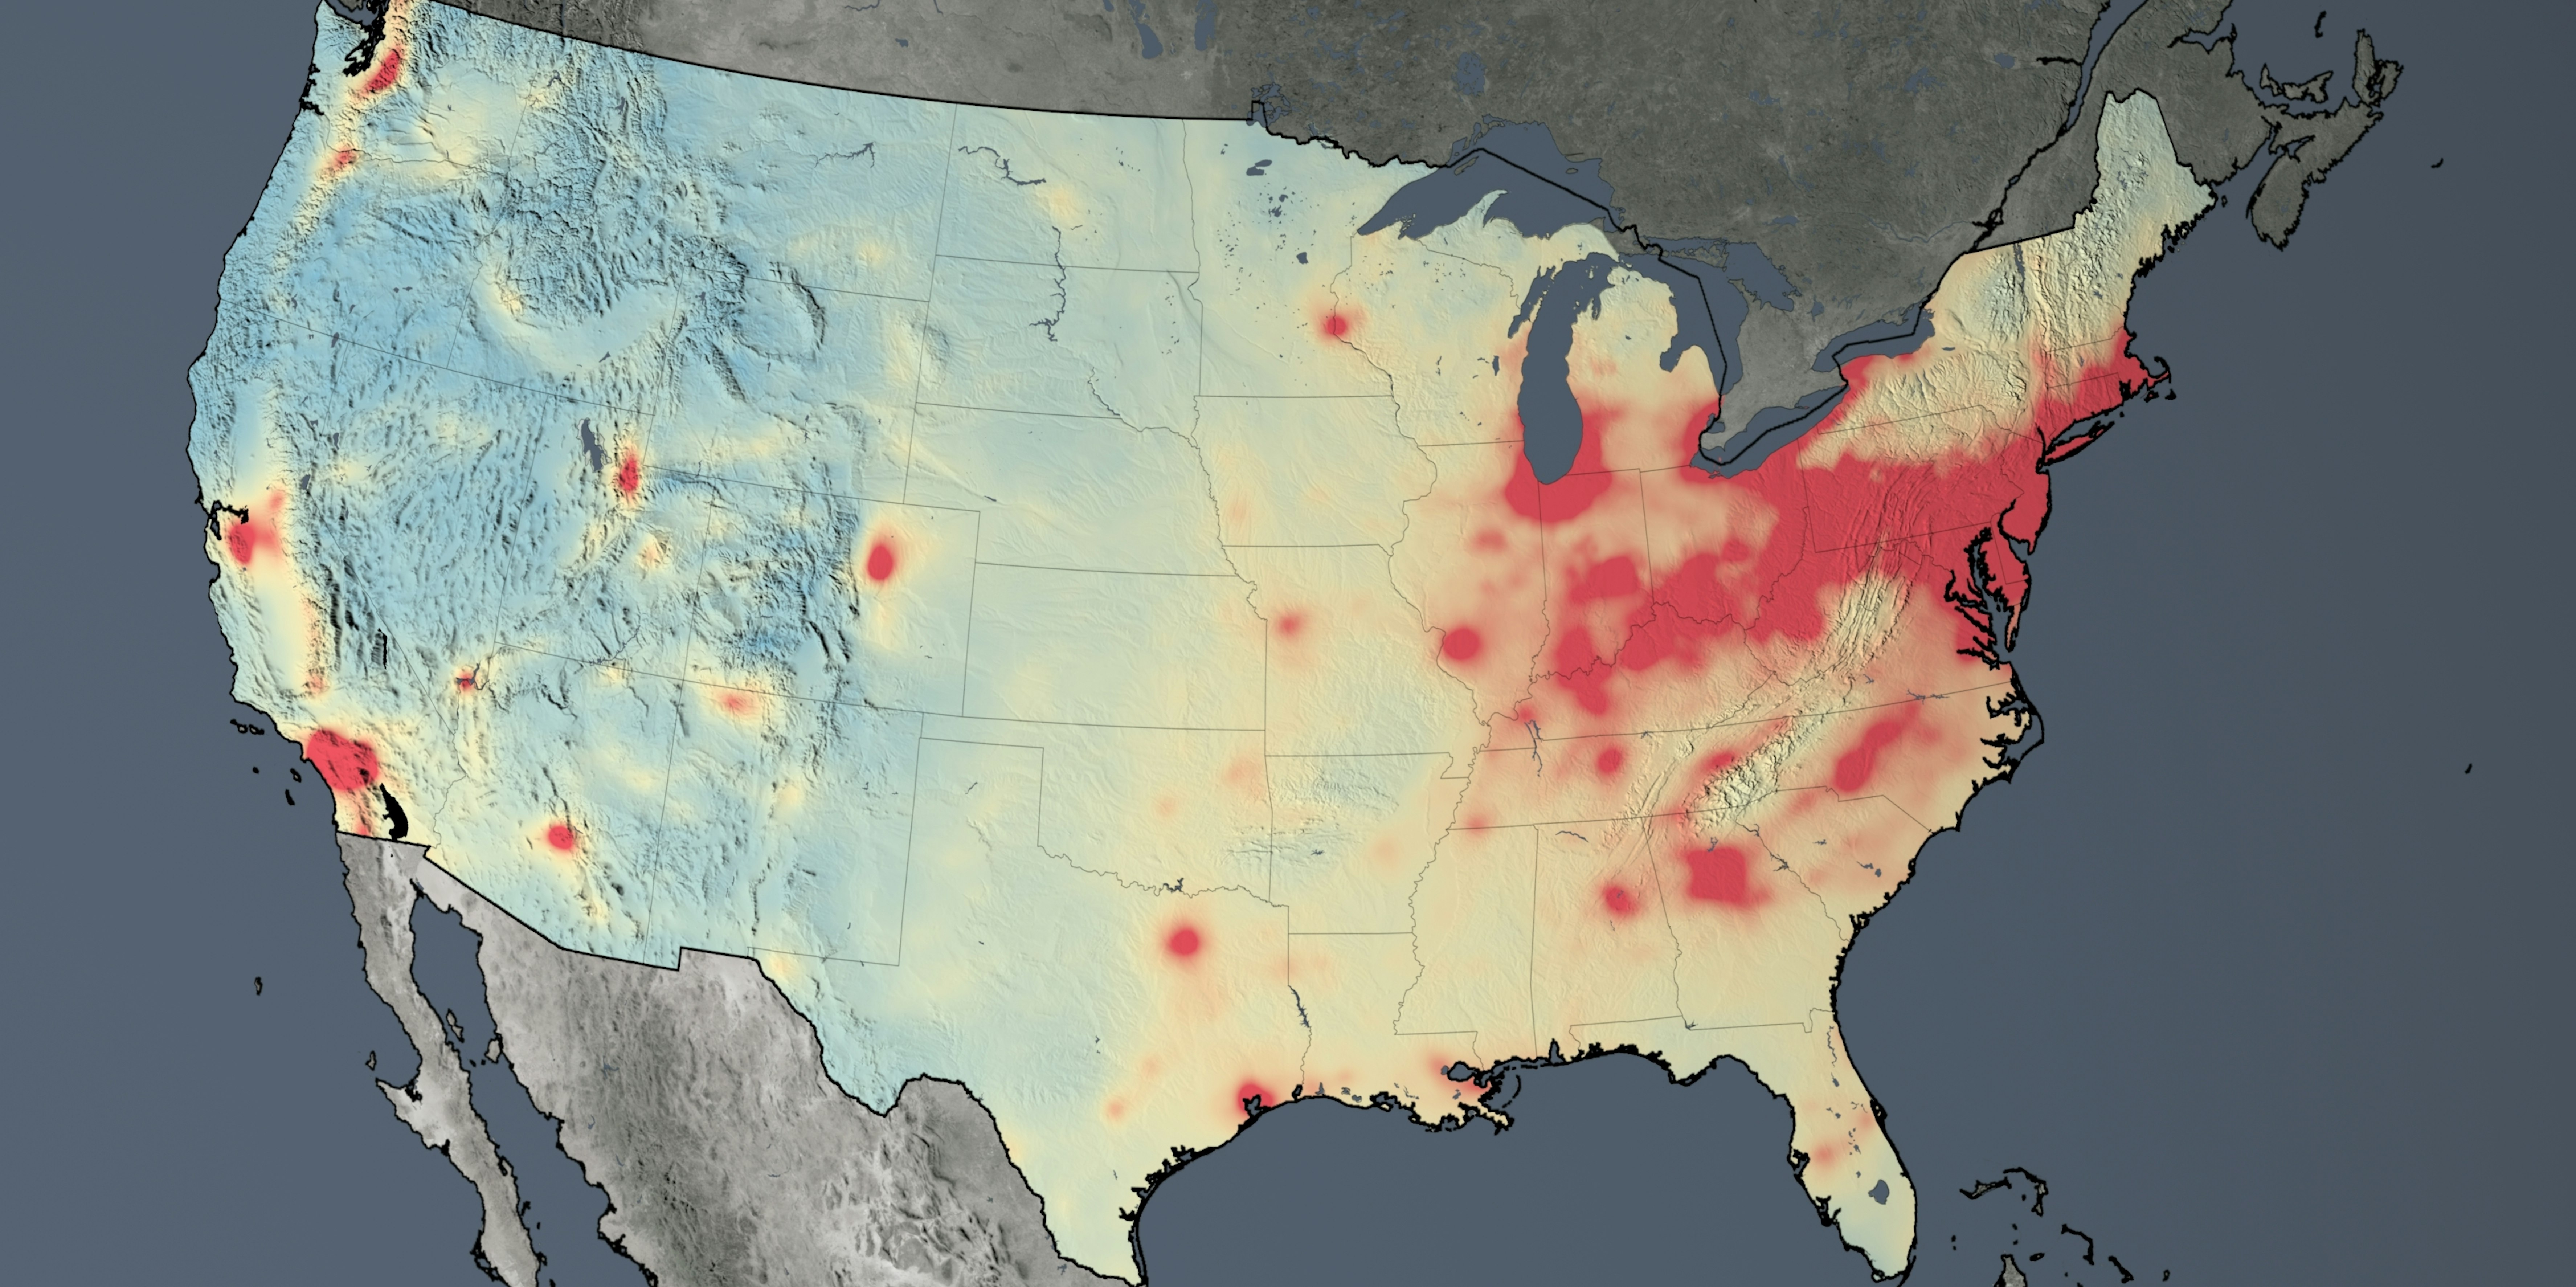 NASA Maps Show Better Air Quality in the USA, Worse Air Quality in